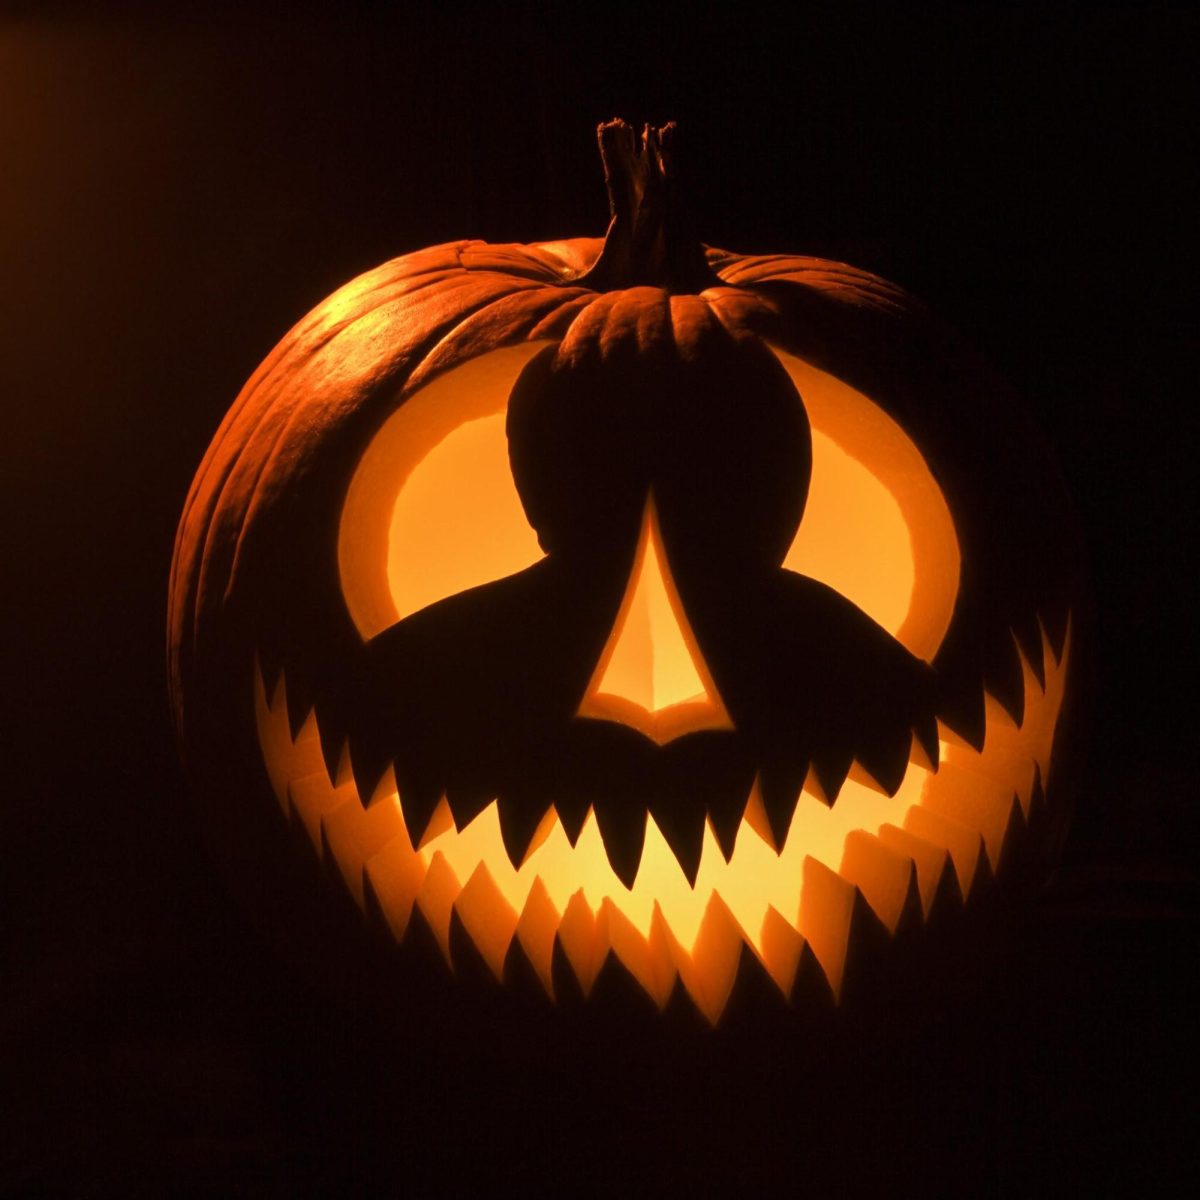 The perfect spooky pumpkin to display on your front porch for Halloween. 